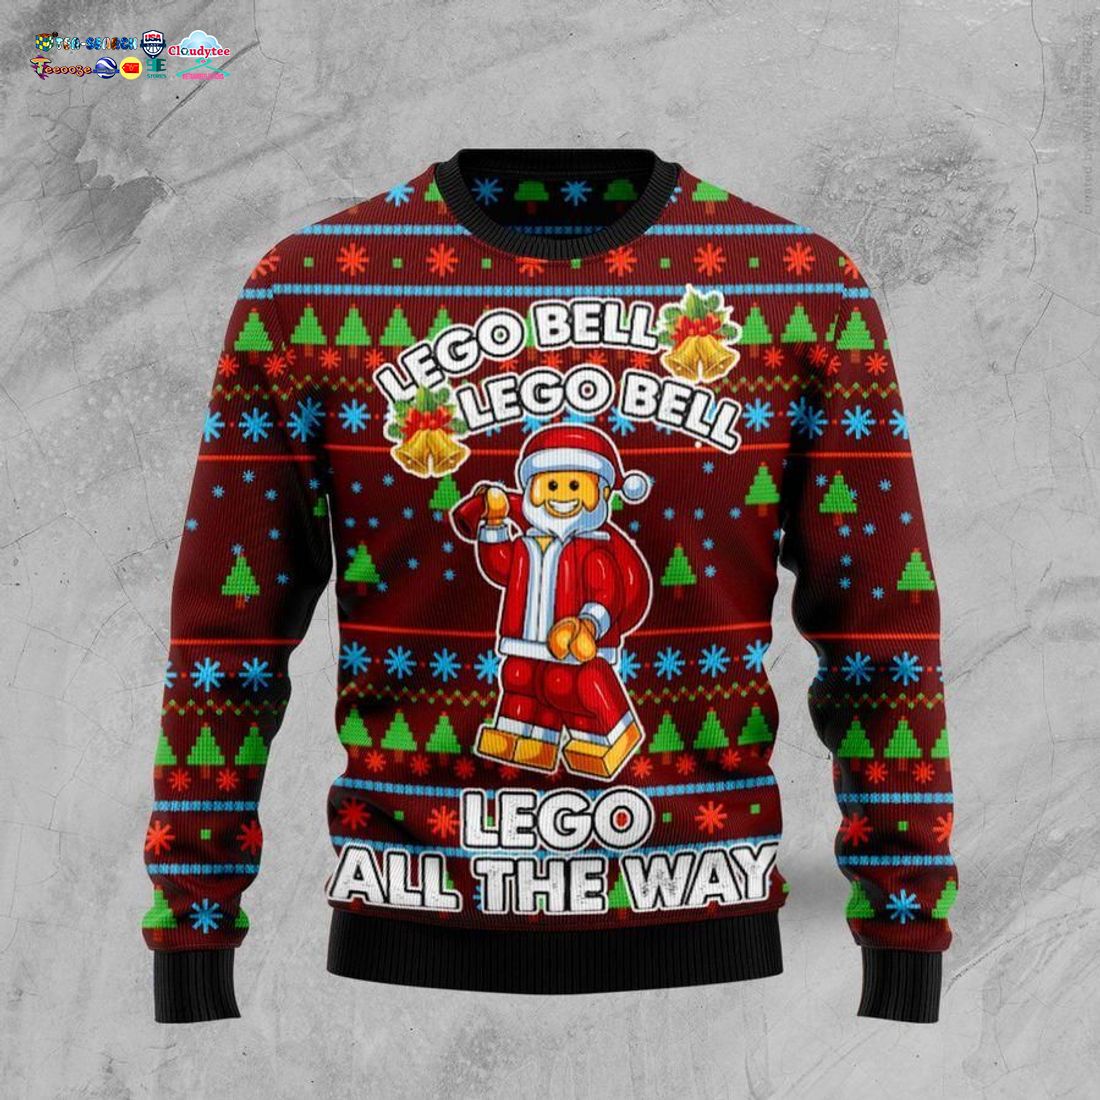 santa-lego-bell-lego-bell-lego-all-the-way-ugly-christmas-sweater-1-e7fBS.jpg